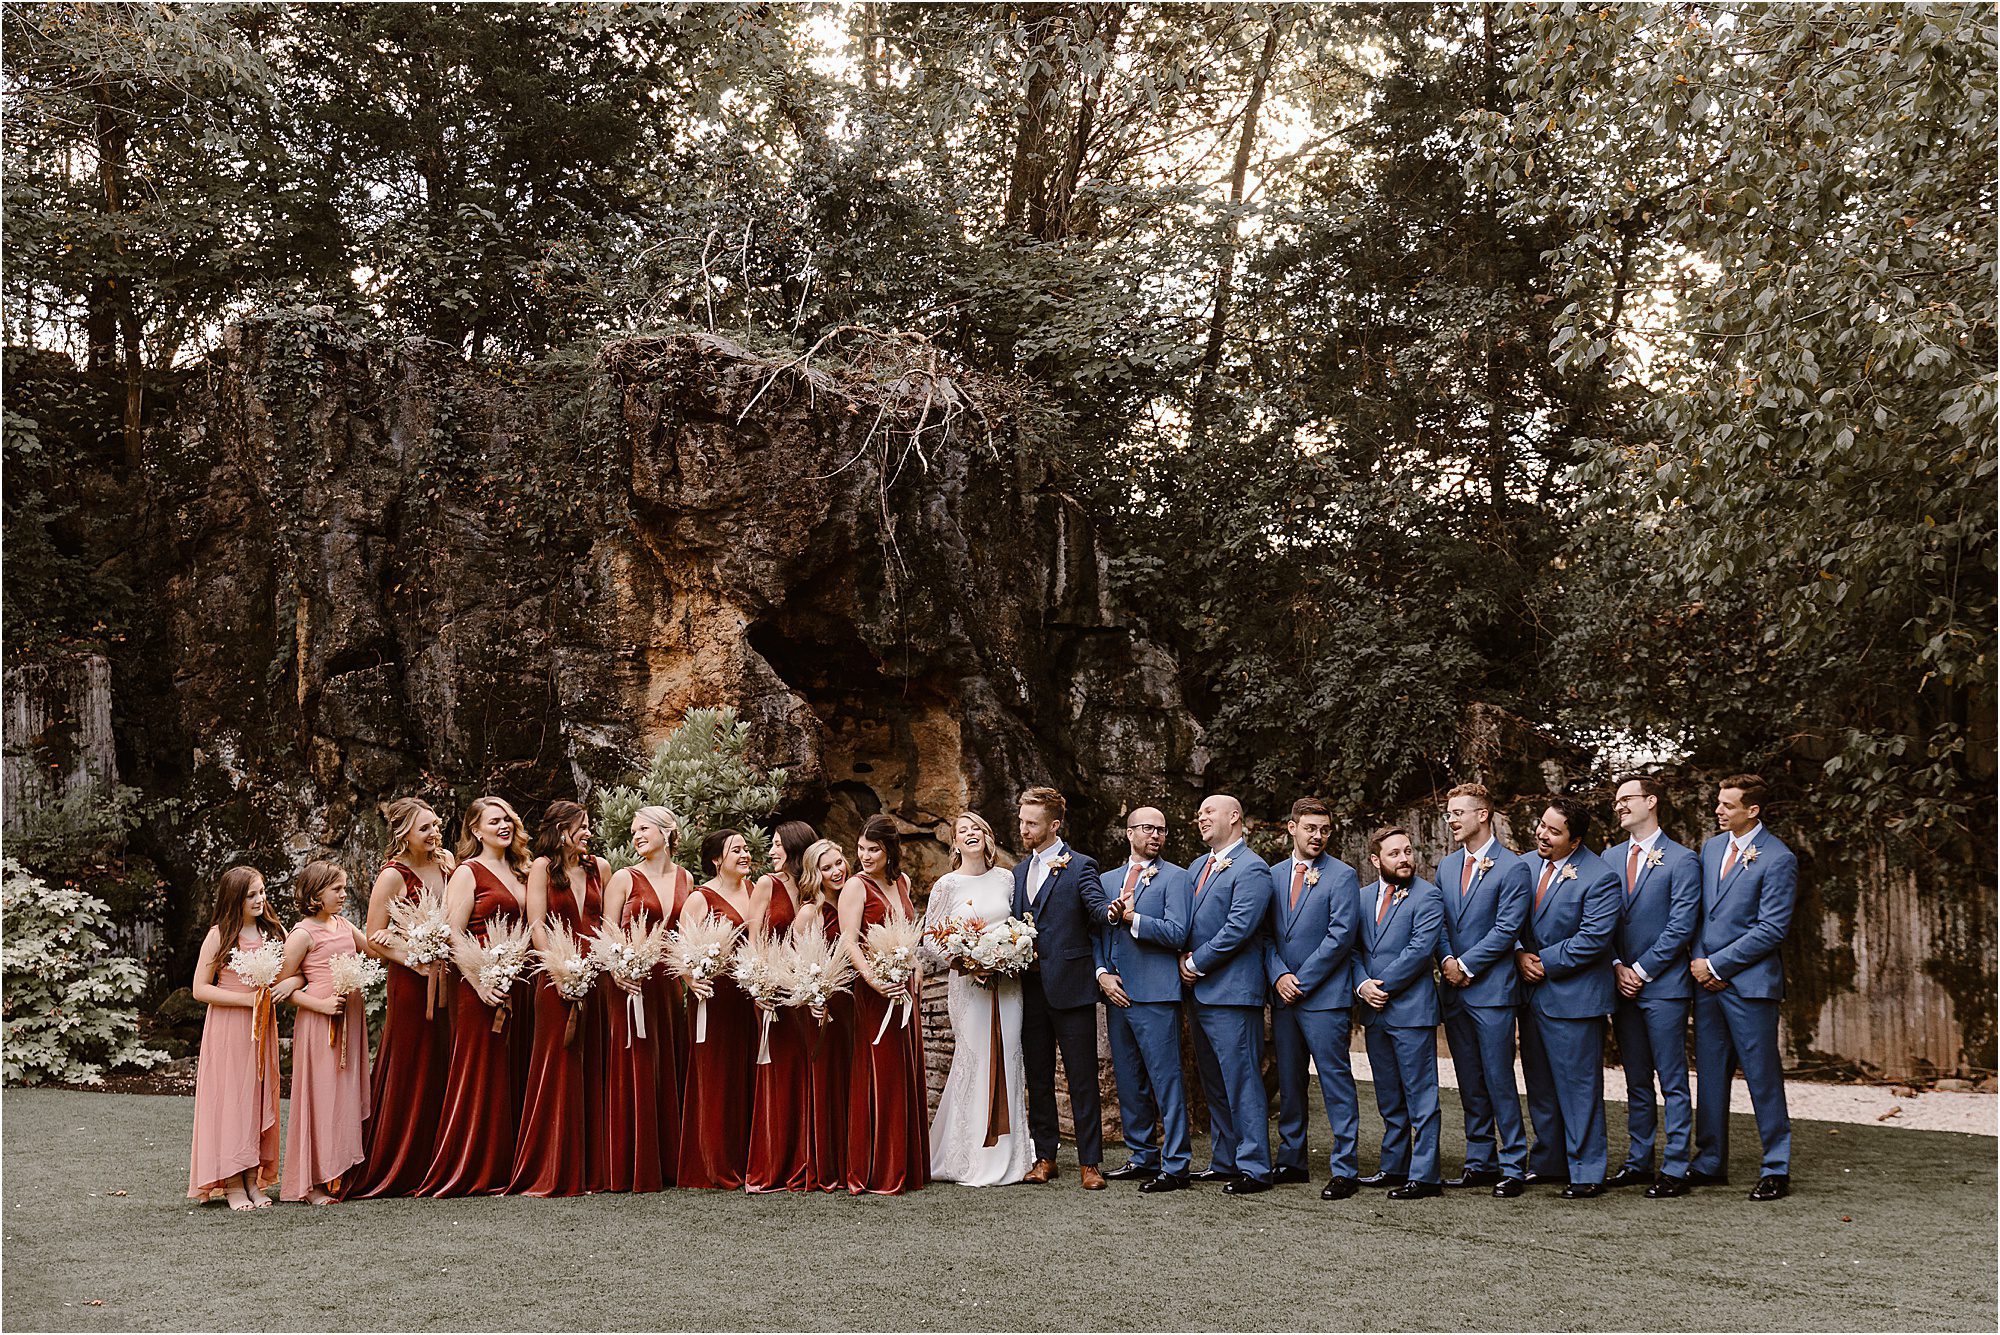 Earthy Autumnal Wedding at Marble Quarry with Impressive Floral Details